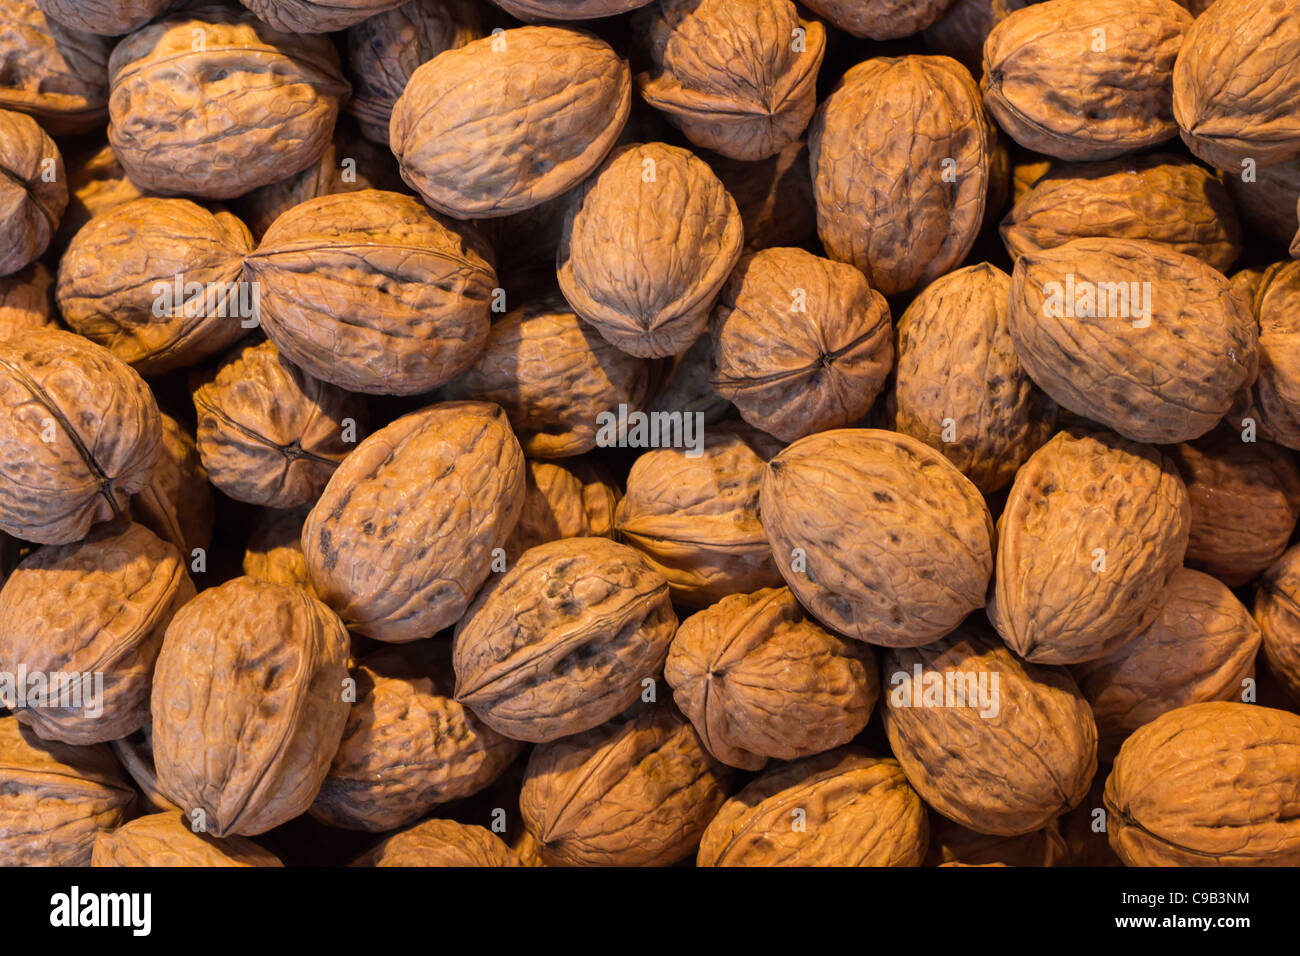 A box of closed nuts Stock Photo